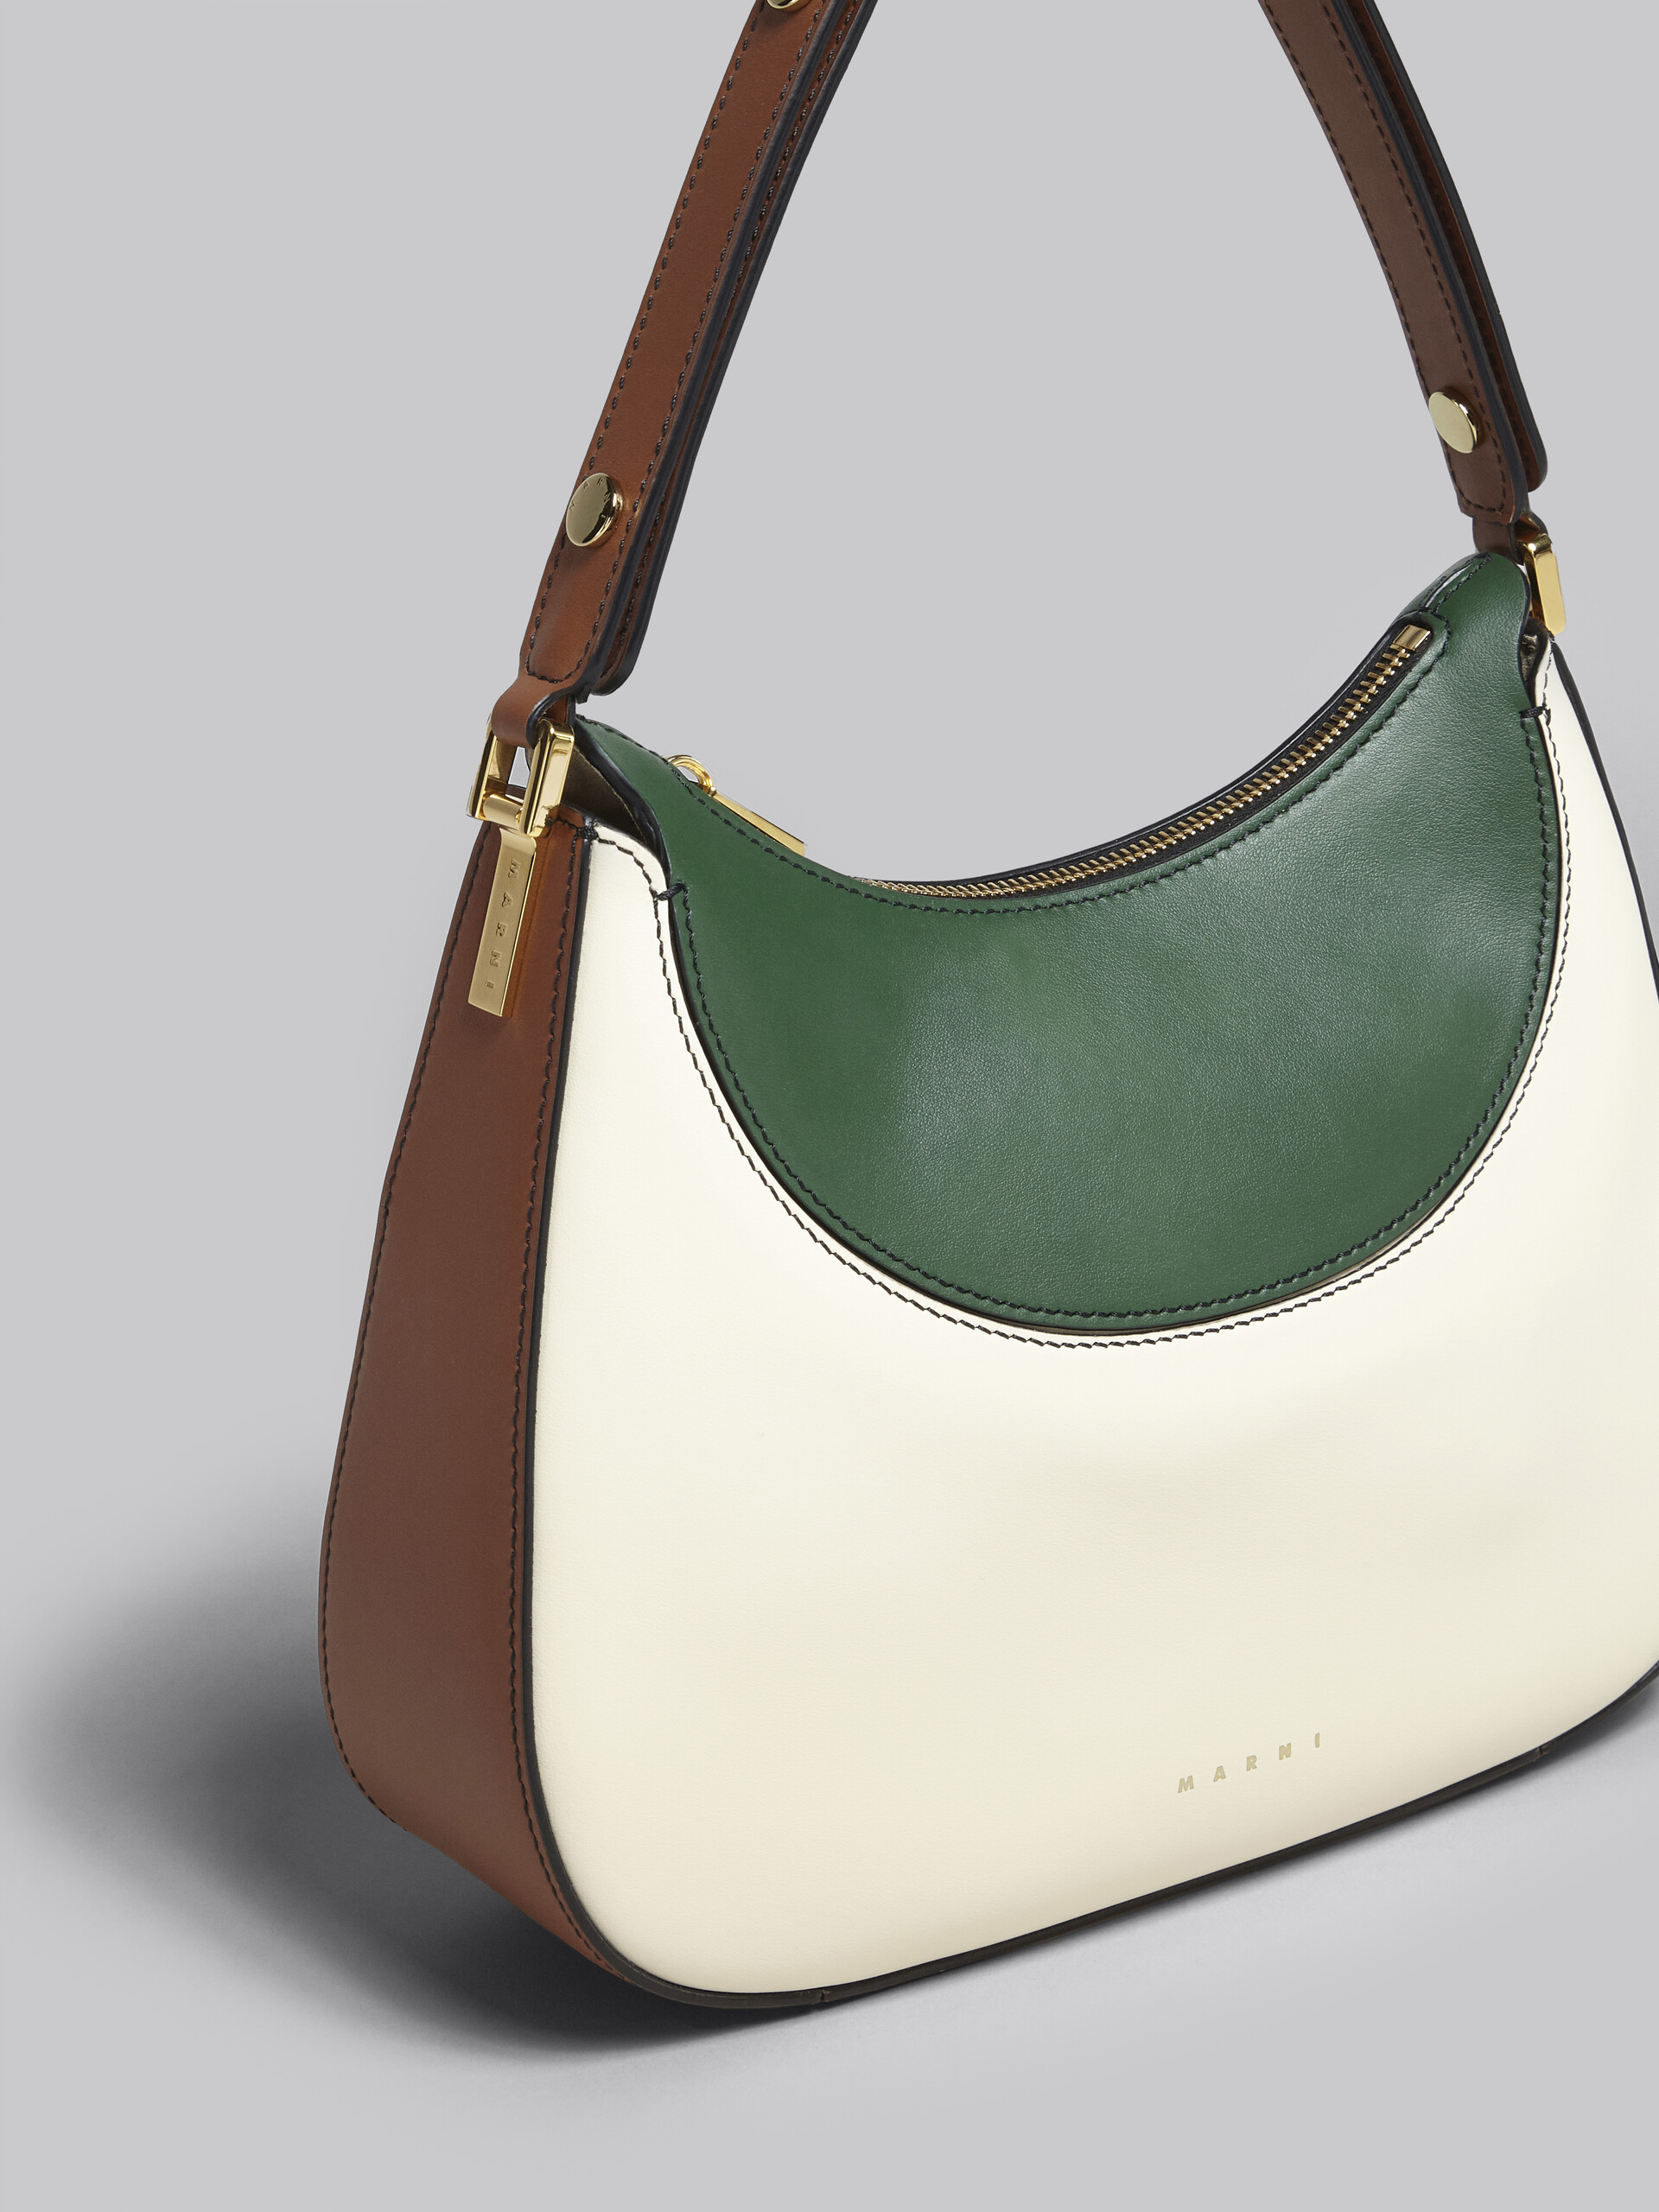 Milano small bag in white brown and green leather - Handbag - Image 5